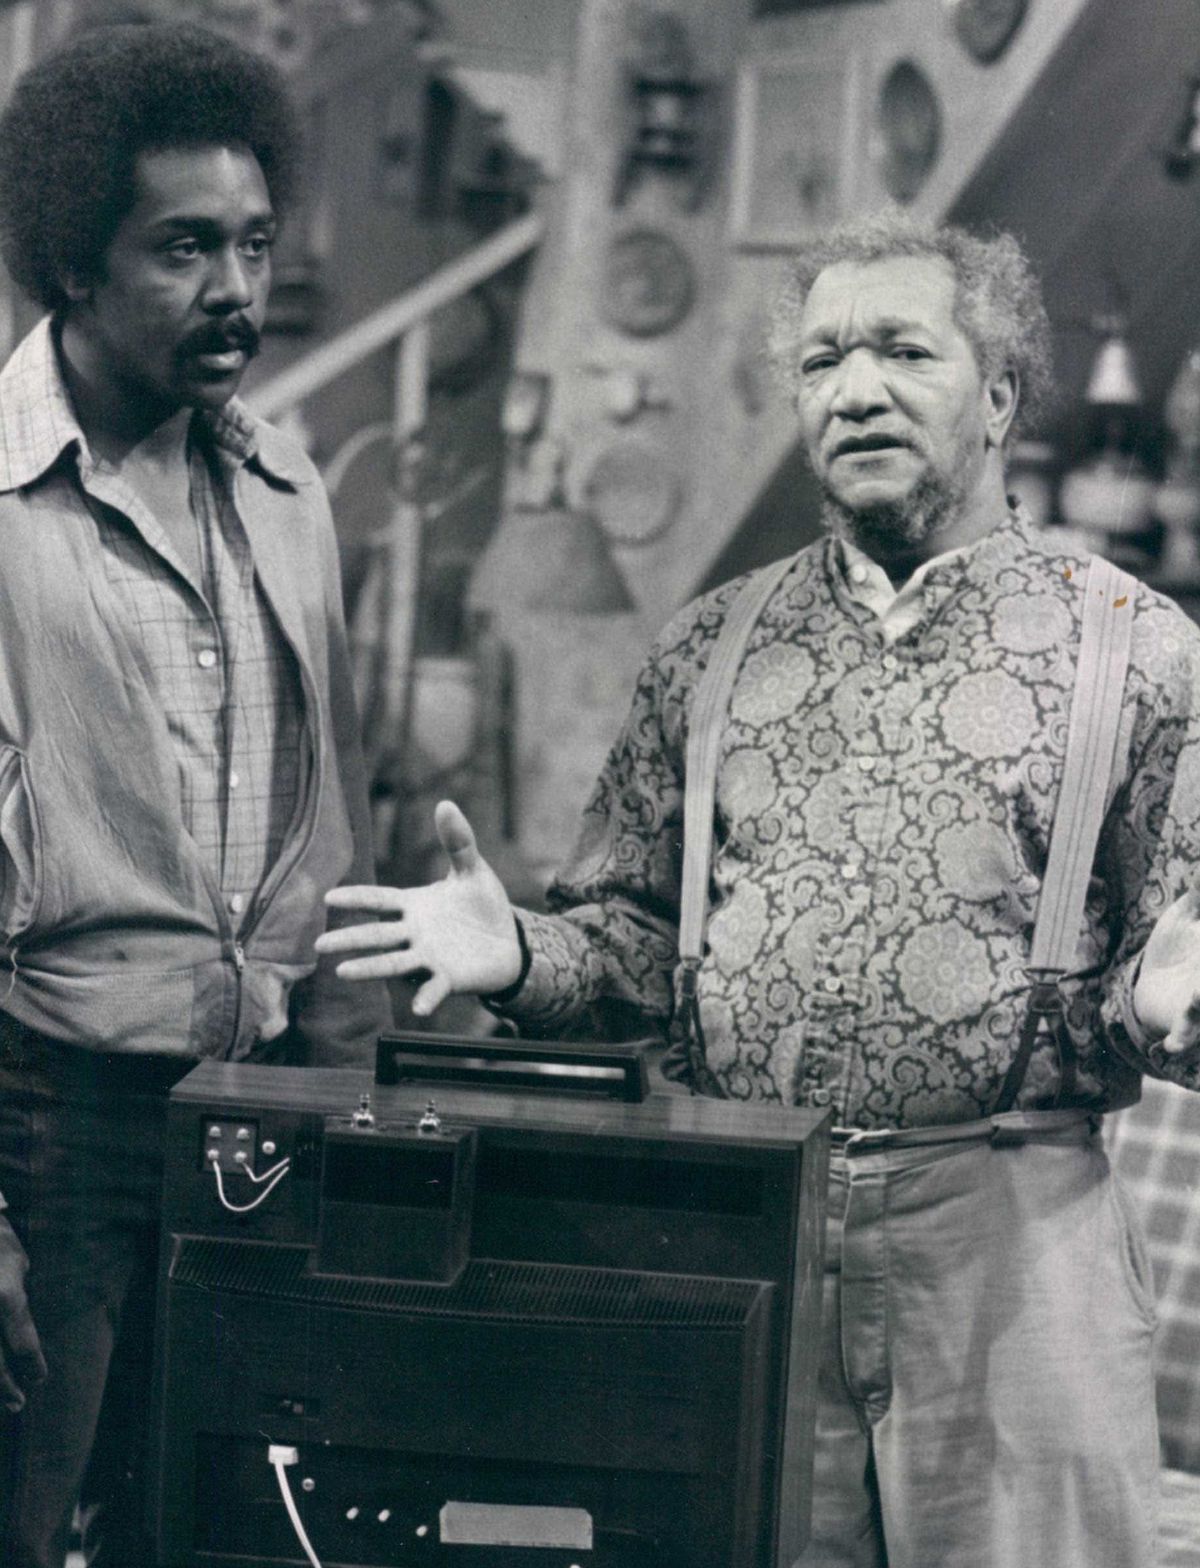 Fred Sanford (Redd Foxx, right) has an explanation for his son Lamont (Demond Wilson) about the TV set he has landed in a deal which in turn lands him in a spot of trouble in “This Little TV Went to Market,” episode of “Sanford and Son” in 1973. 